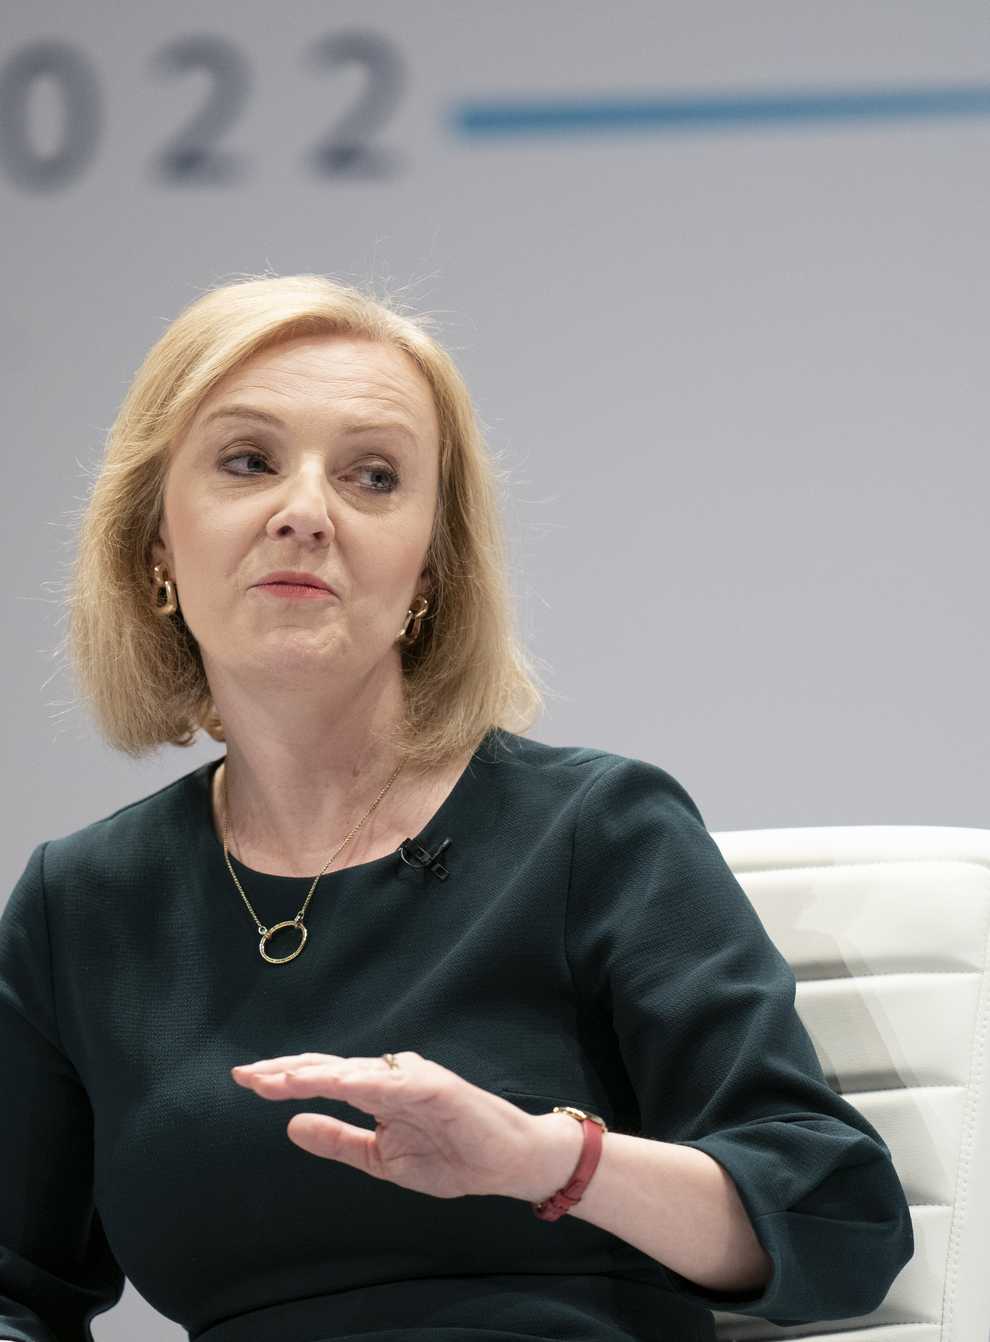 The Liz Truss camp has said the Tory leadership frontrunner is leaning towards targeted support over extra help for all to ease the cost-of-living crisis, but maintained she is not “ruling anything out” at this stage (Jane Barlow/PA)